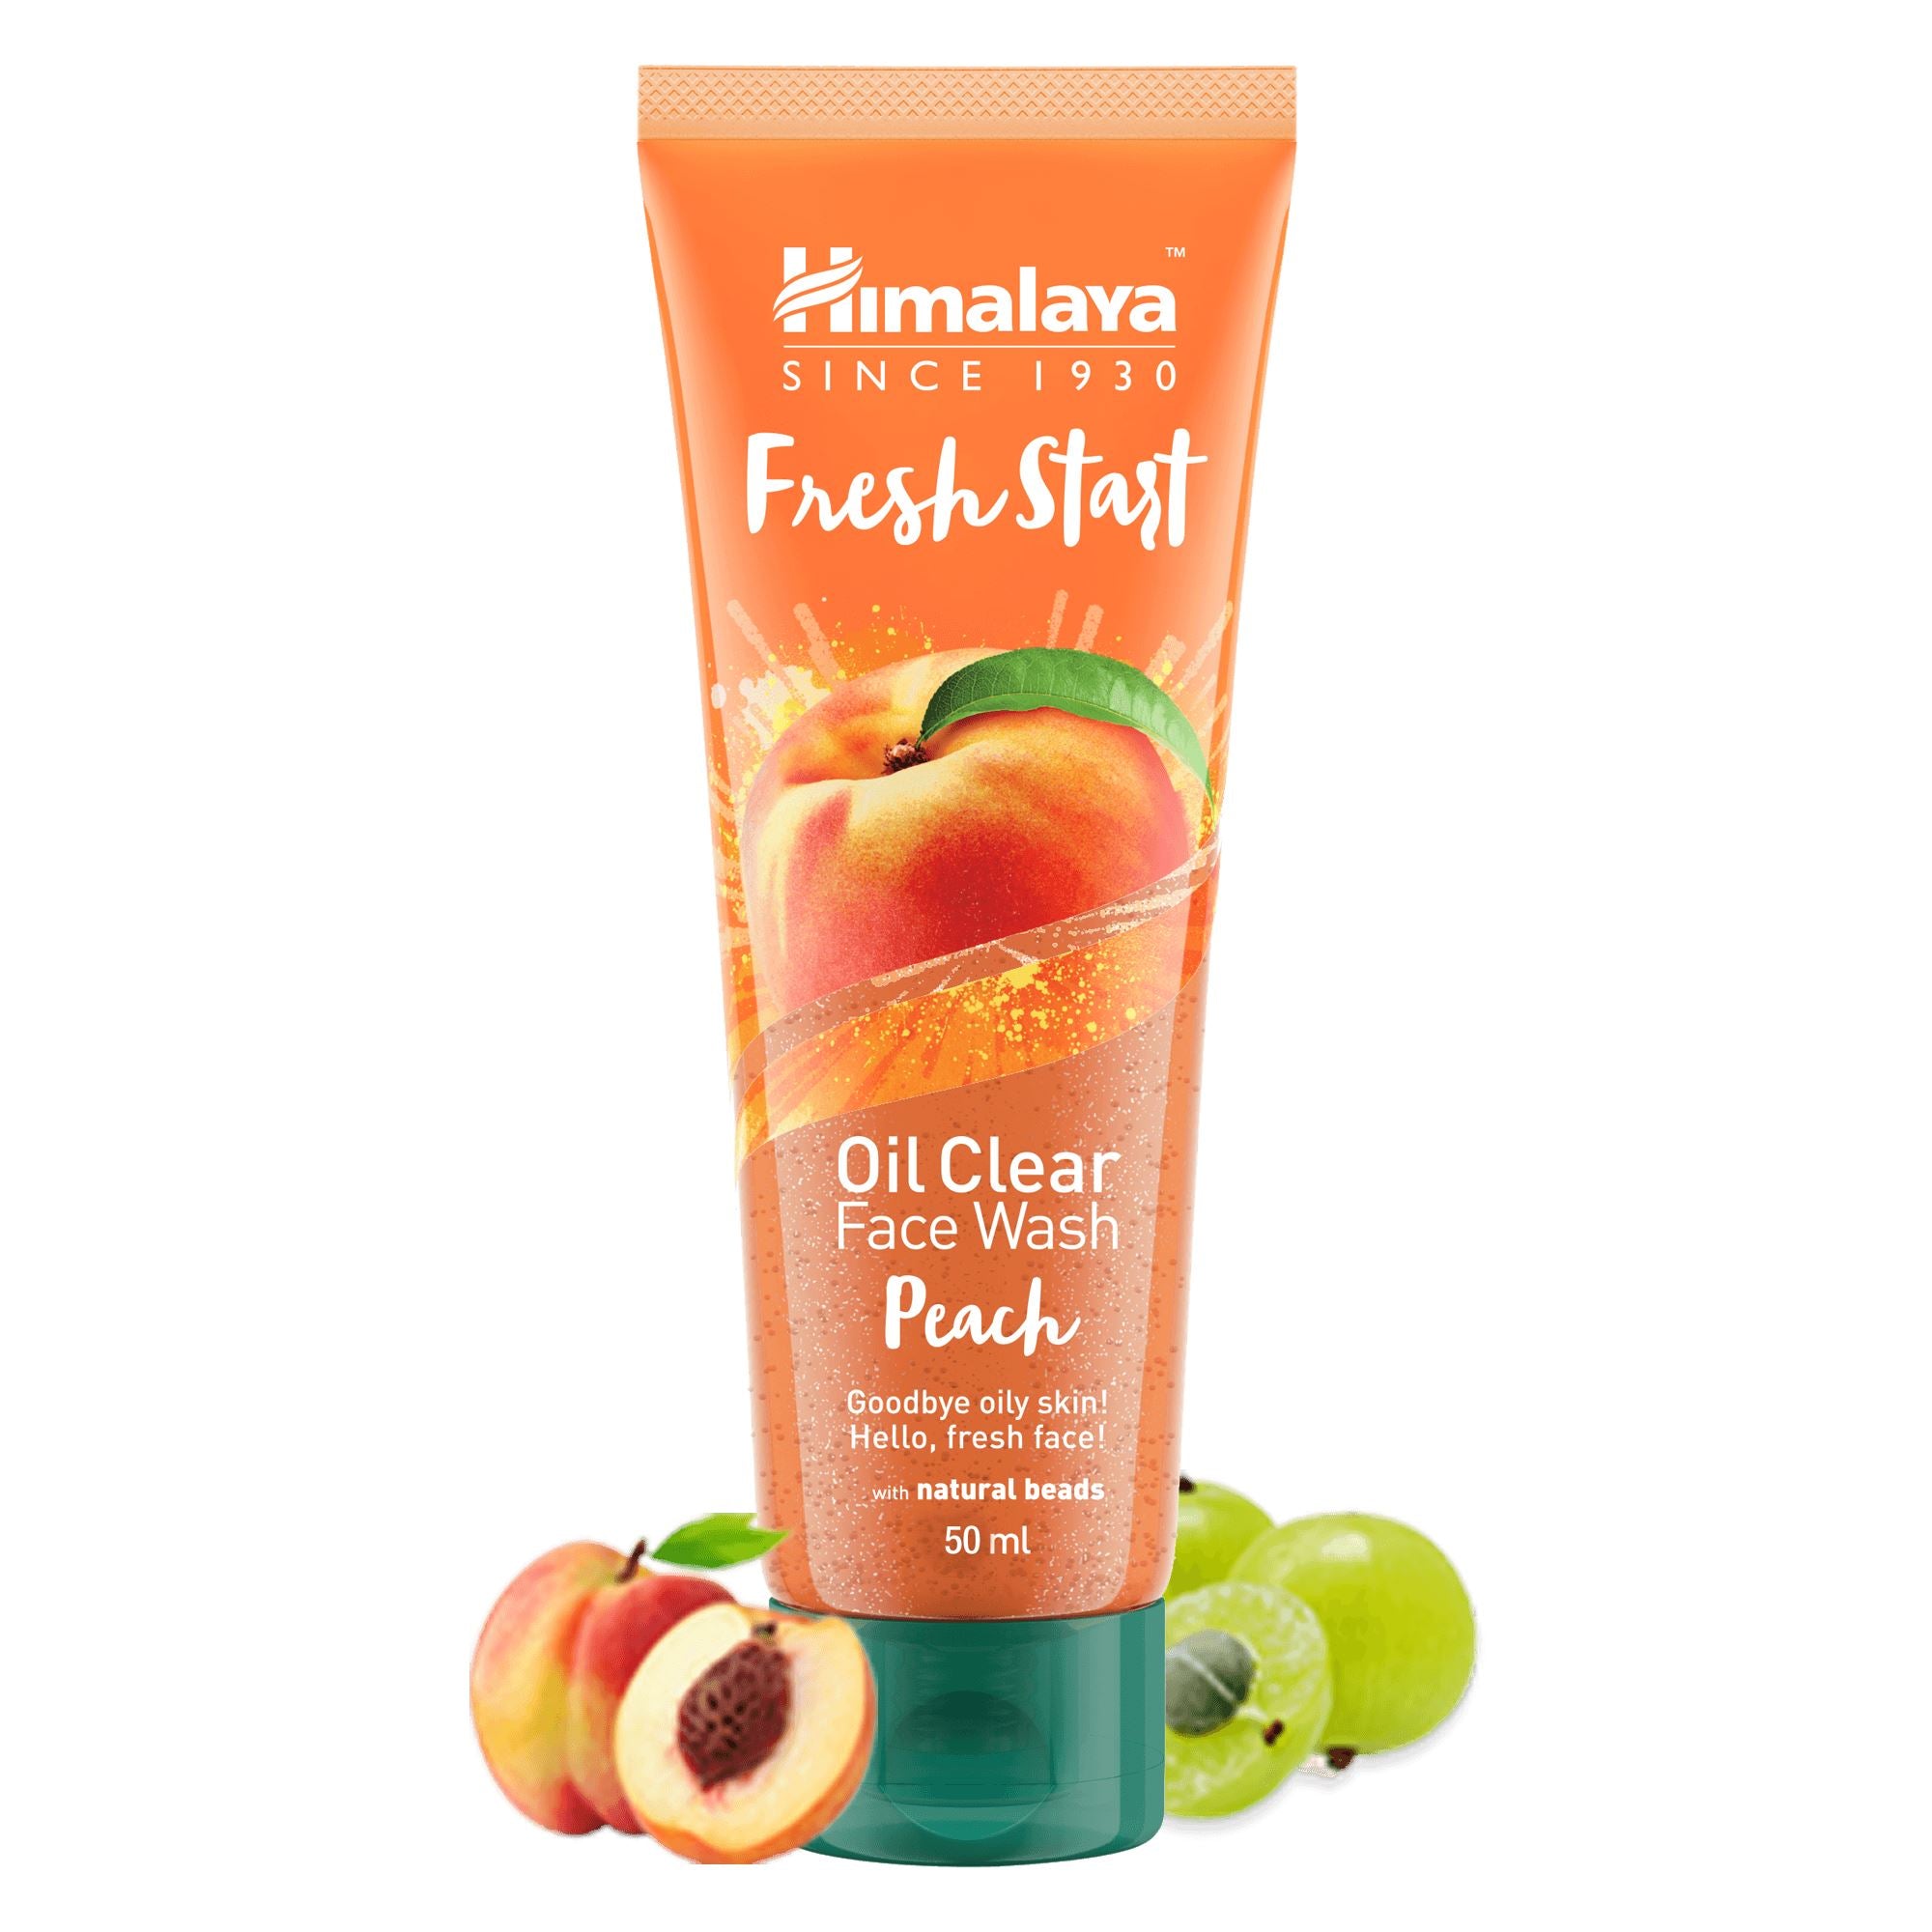 Himalaya Fresh Start Oil Clear Peach Face Wash 50ml - Helps remove excess oil, dirt, and impurities